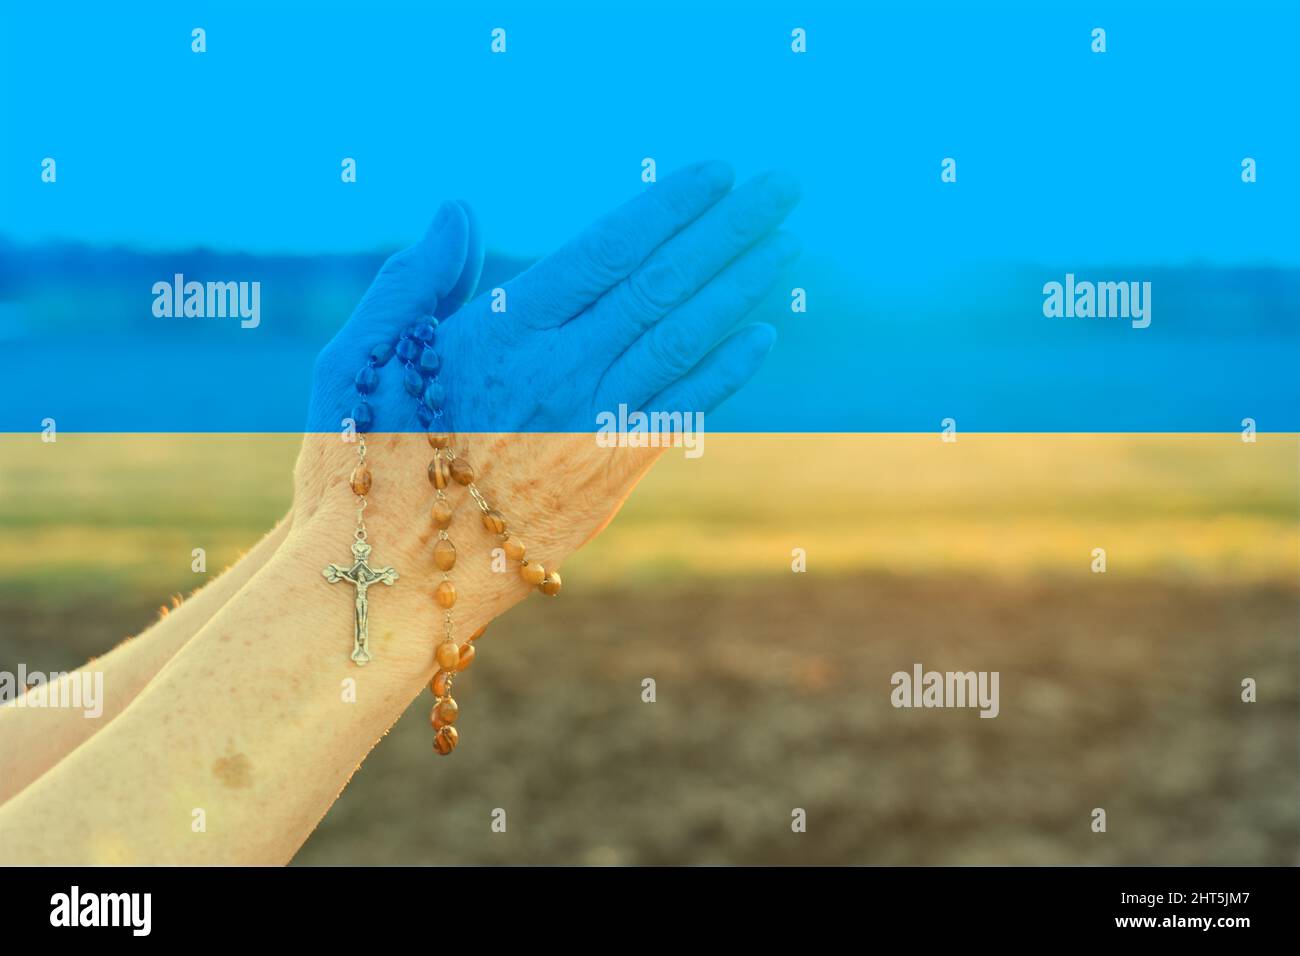 pray for ukraine war concept with flag overlay Stock Photo